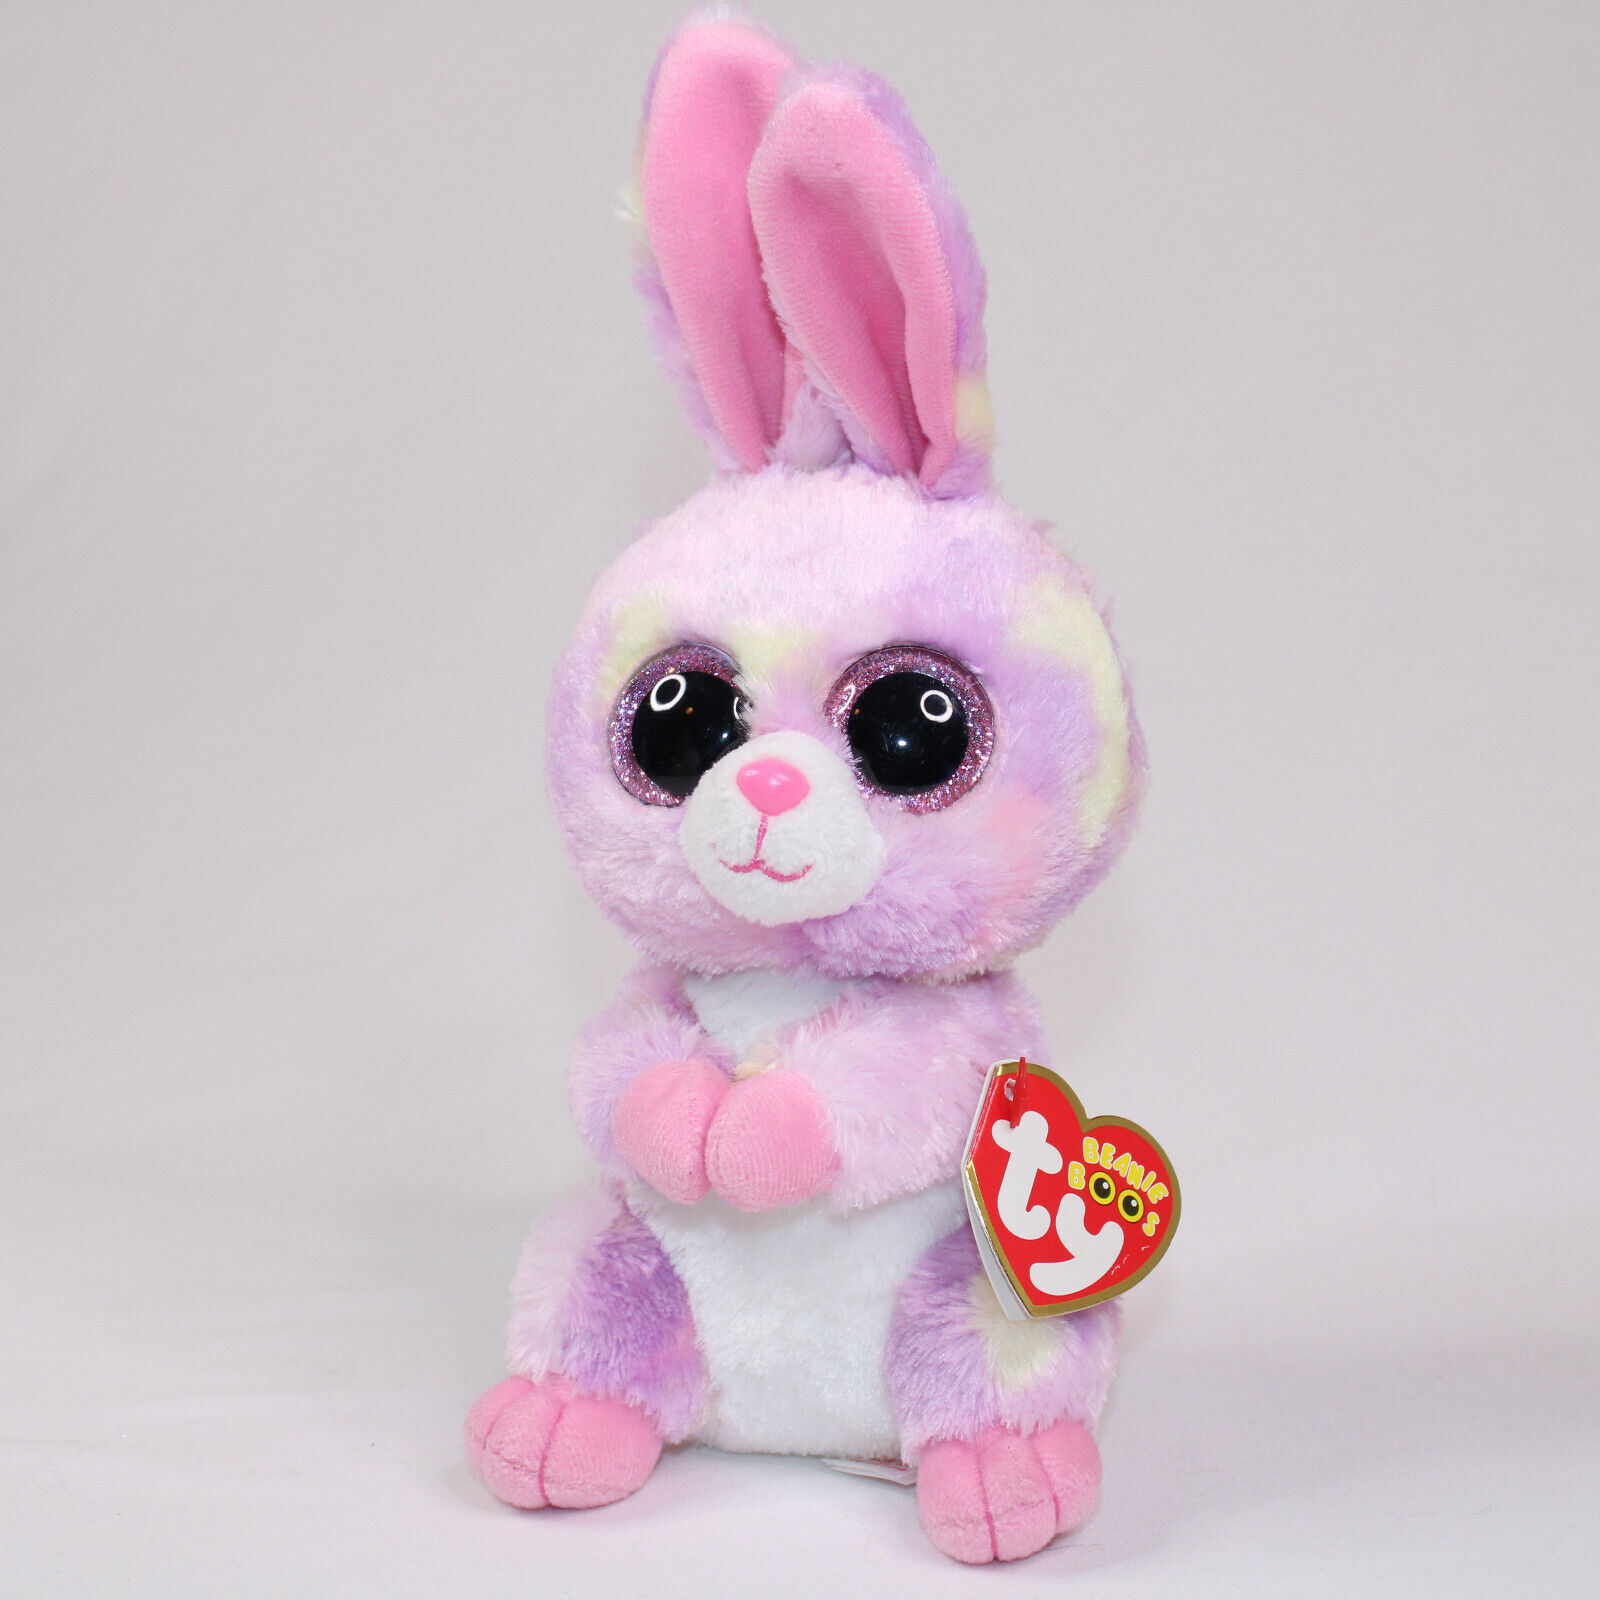 Ty Beanie Boos Small Plush Avril Bunny Rabbit Pastel Purple Pink With Tags 2016 - $9.74